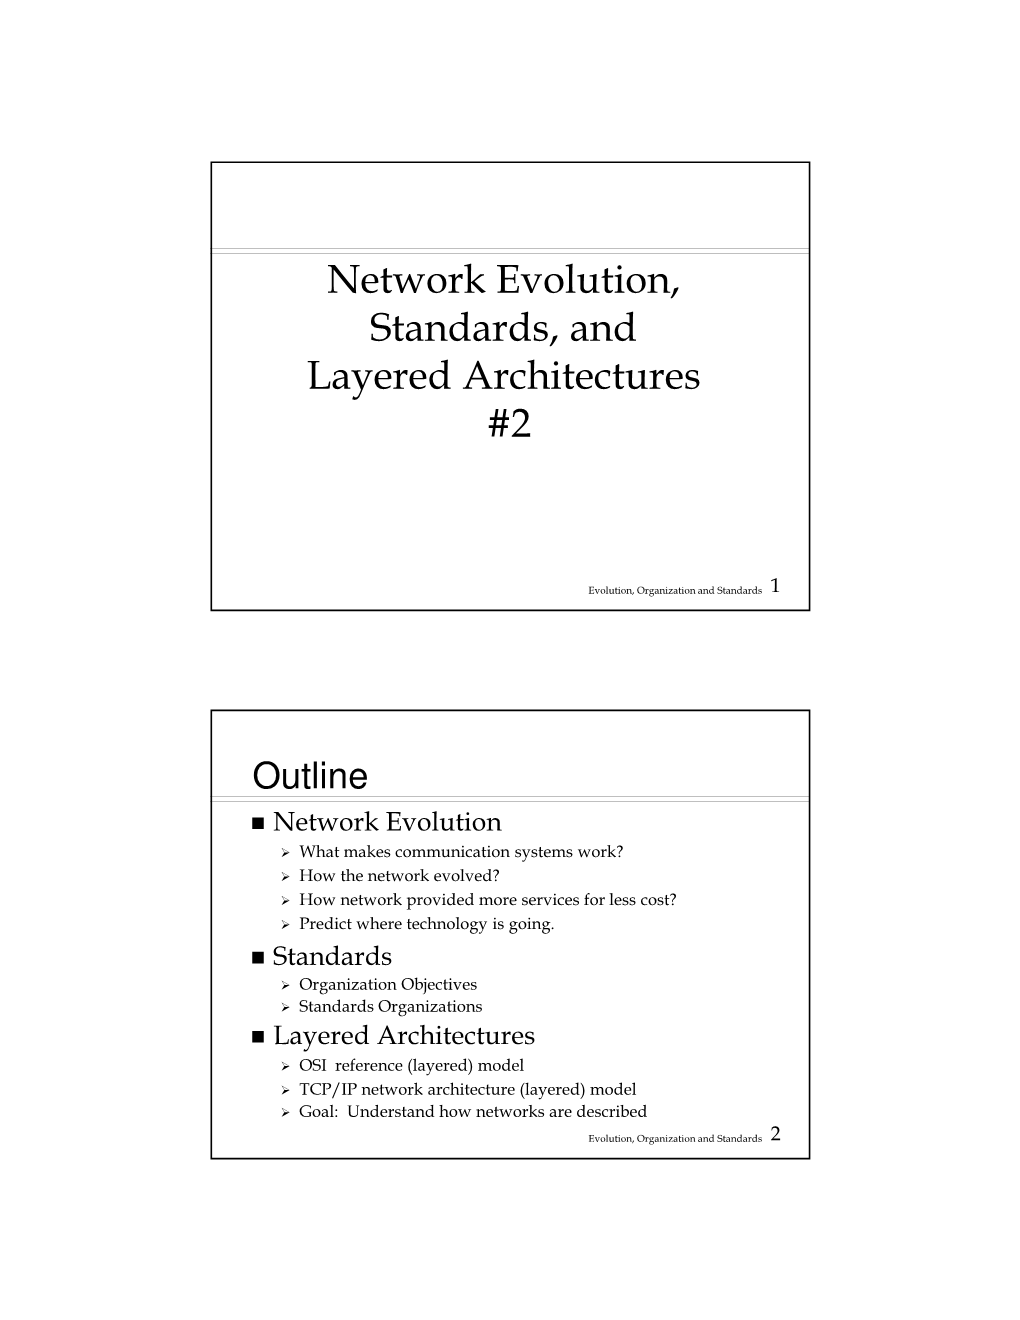 Network Evolution, Standards, and Layered Architectures #2